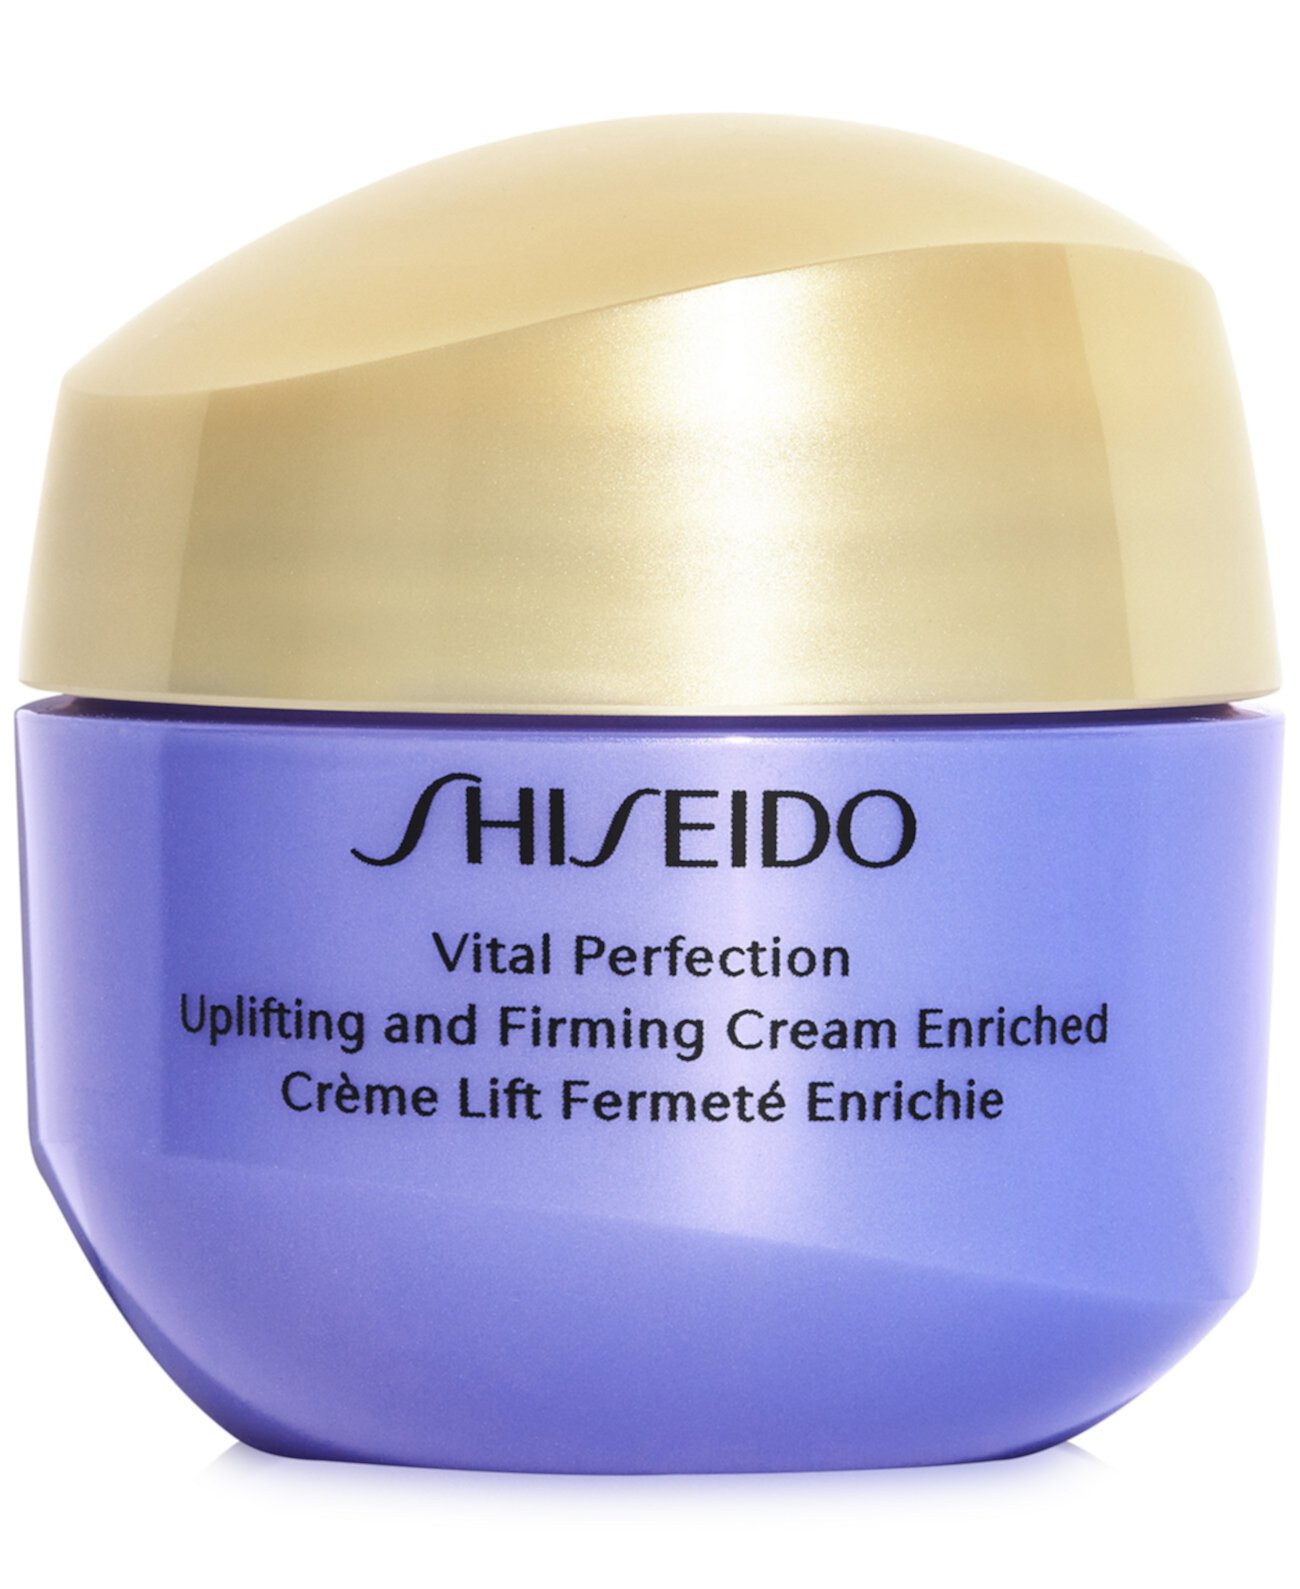 Shiseido firming. Shiseido Vital perfection Uplifting and Firming Cream enriched. Крем Shiseido Vital perfection. Шисейдо Vital perfection Uplifting. Shiseido Vital perfection Vital perfection.